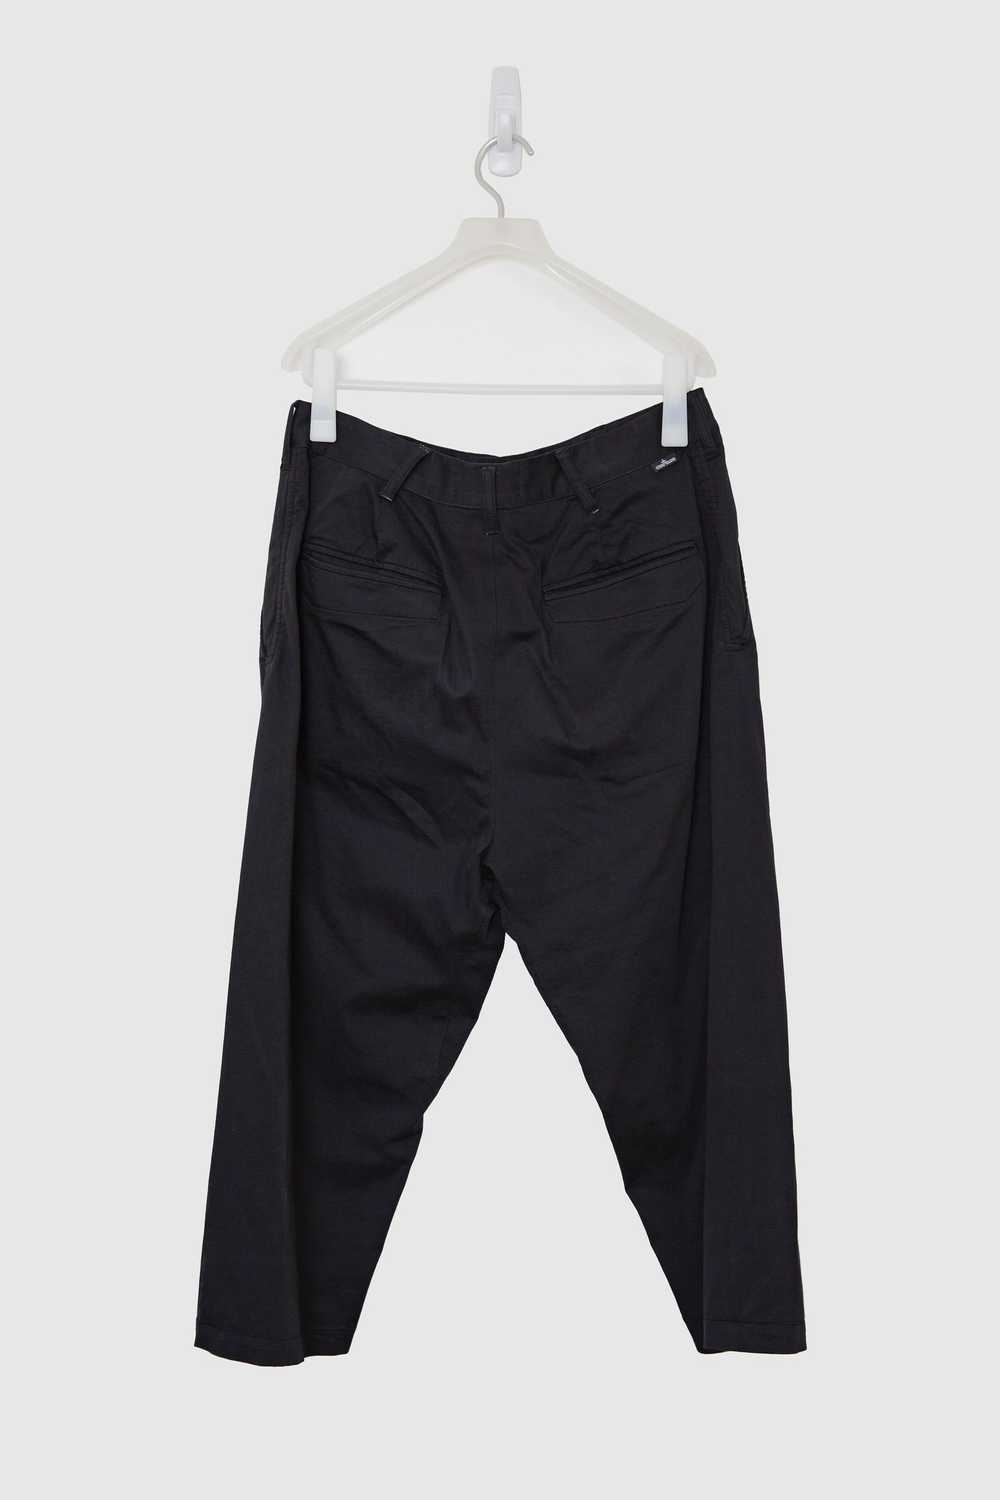 Stone Island Shadow Project Cropped Pants - image 2